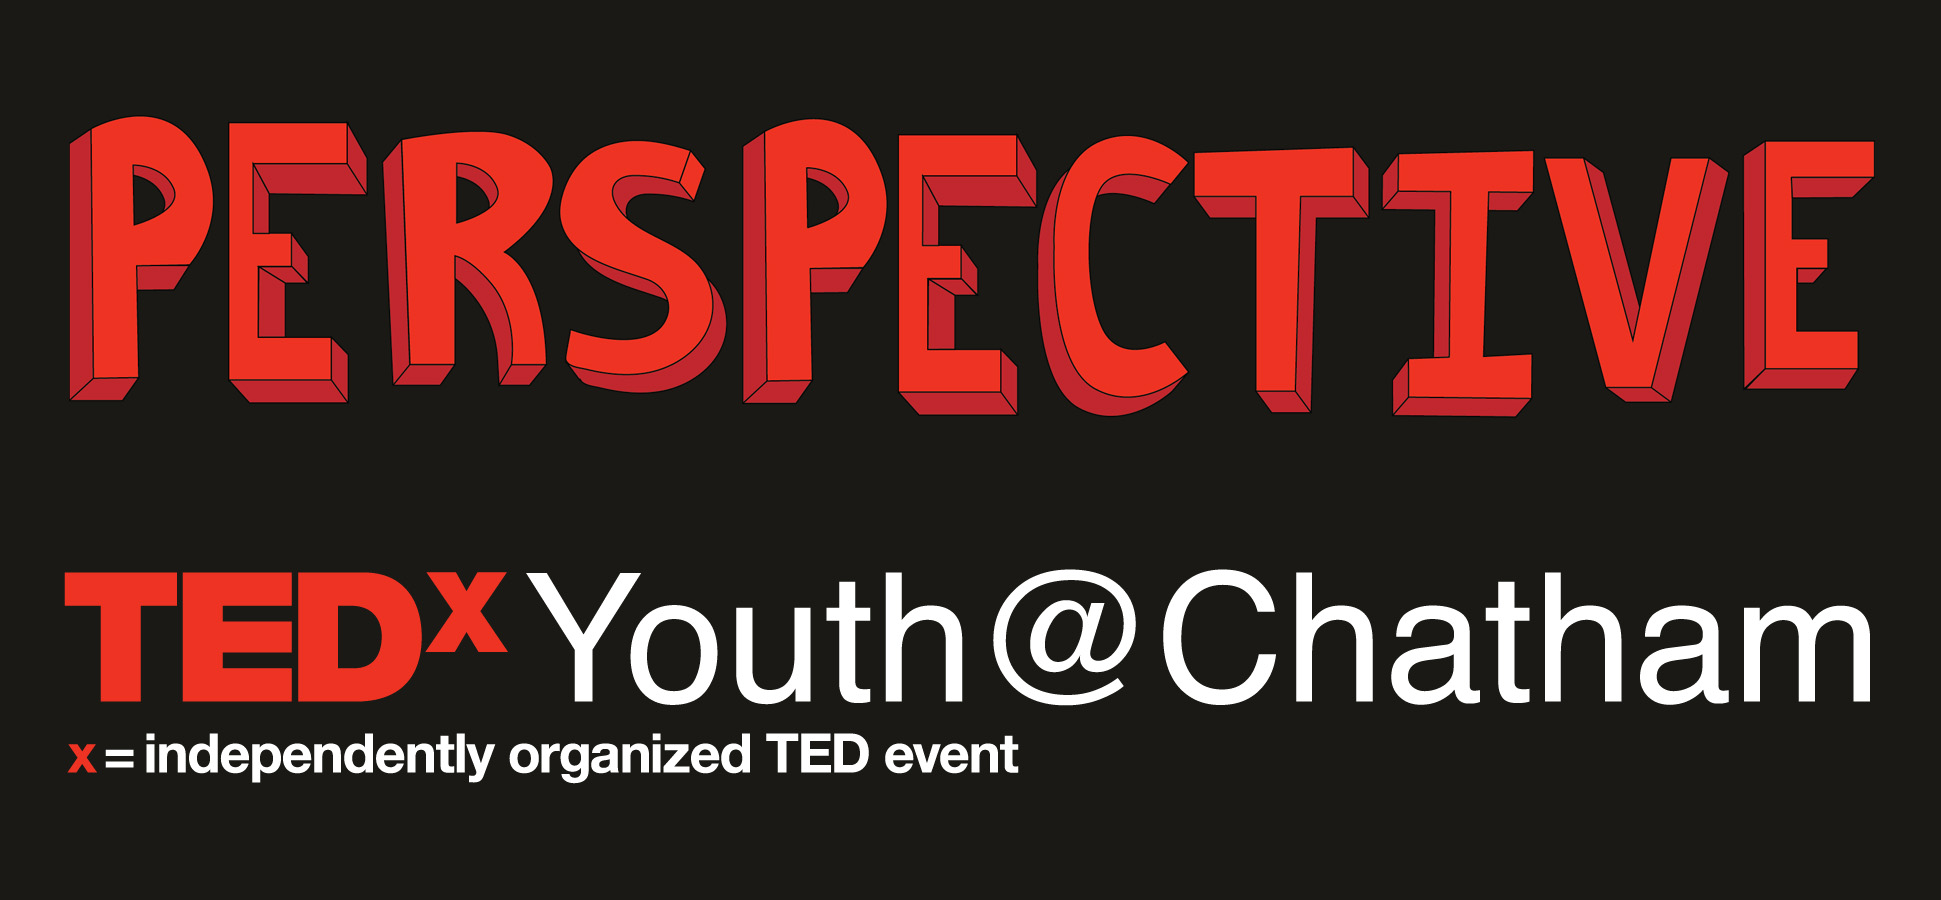 perspective tedx youth at chatham 